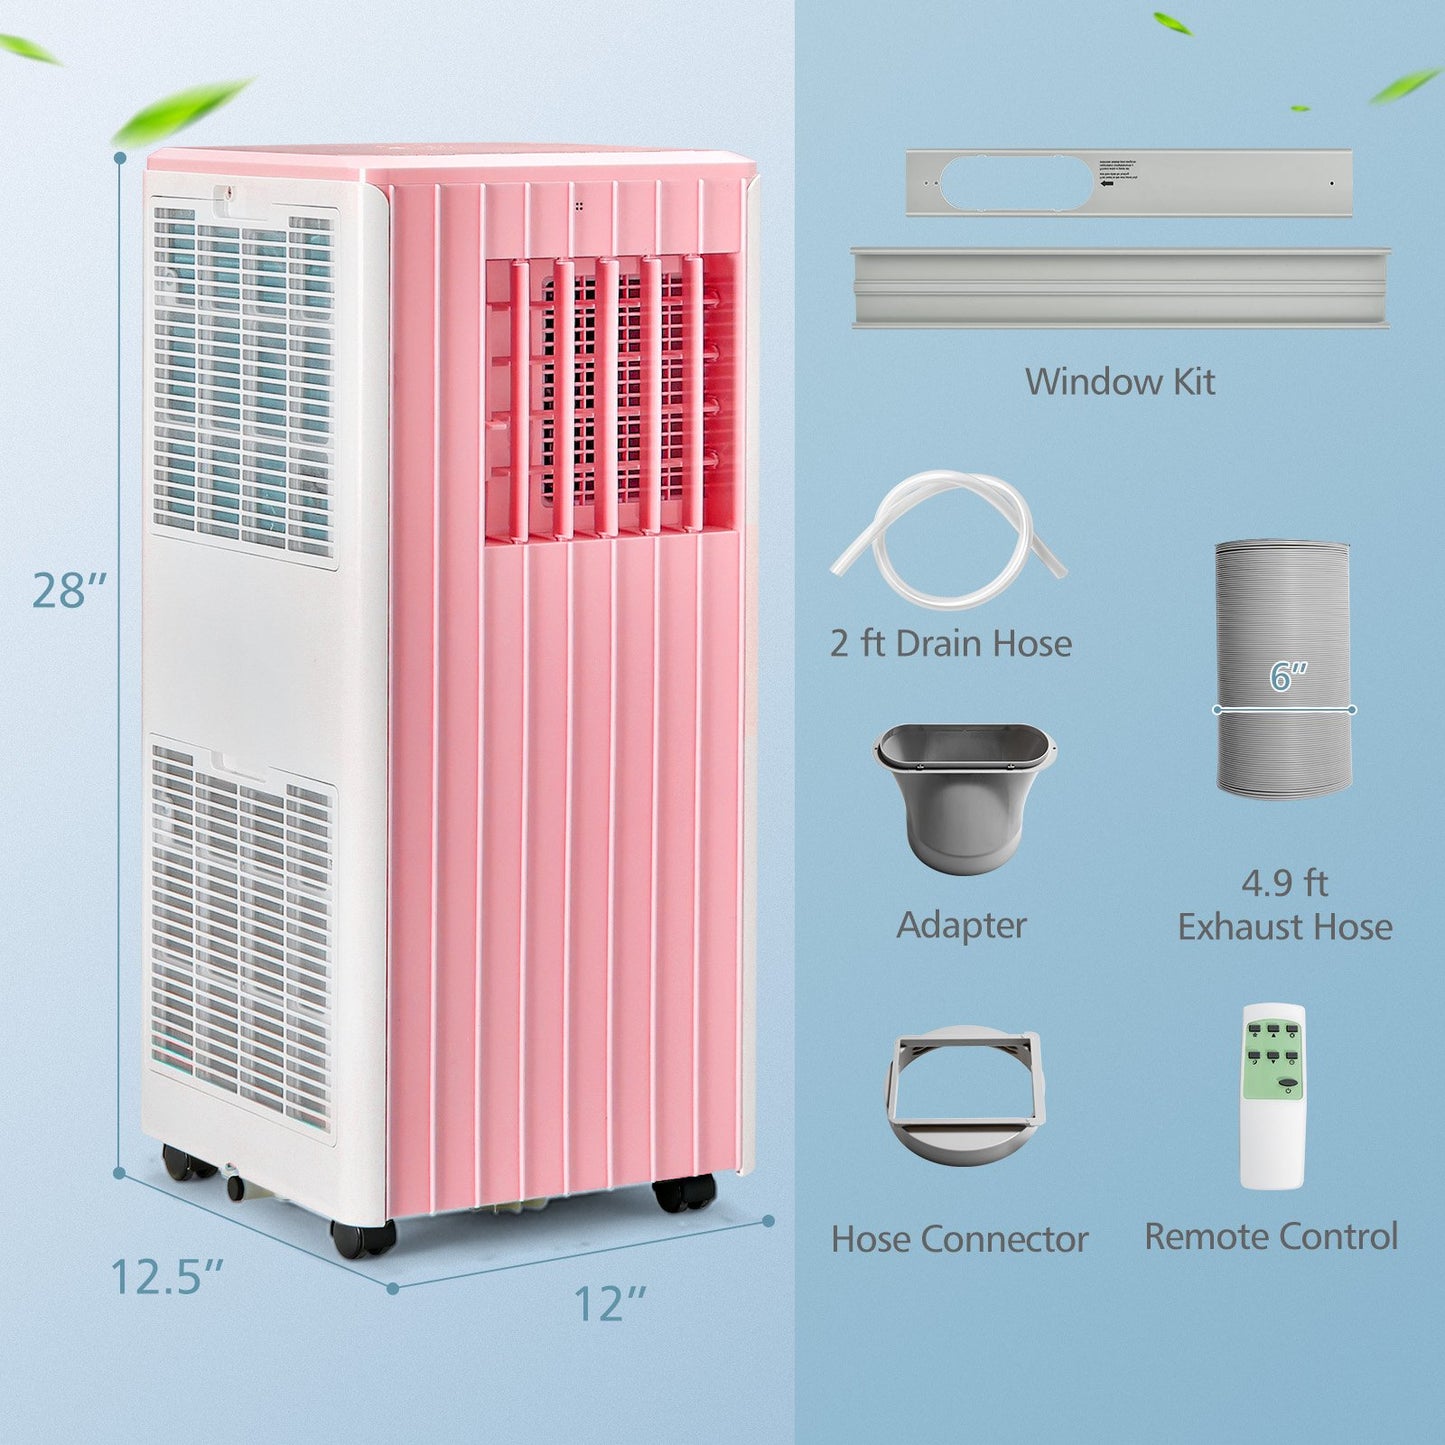 3-in-1 10000 BTU Air Conditioner with Humidifier and Smart Sleep Mode, Pink